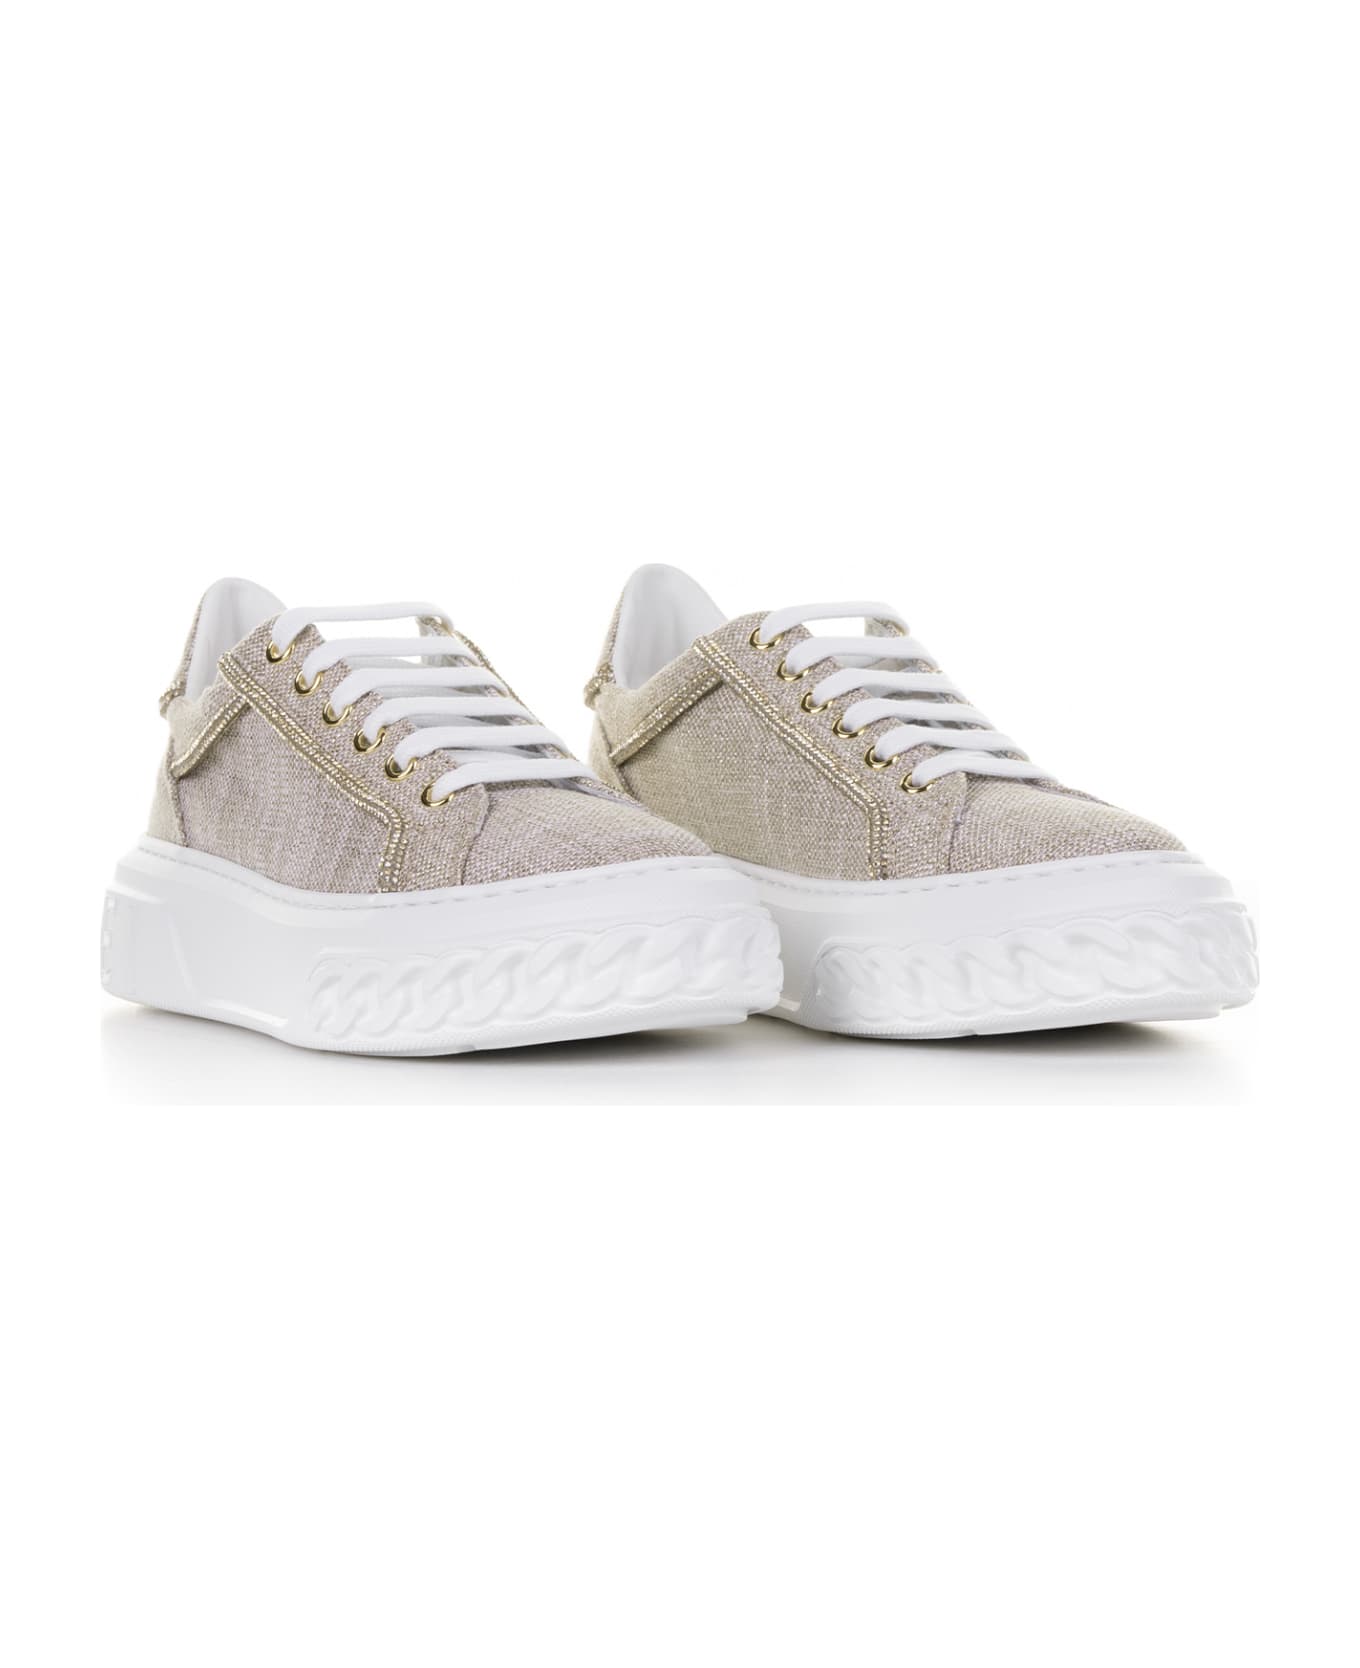 Casadei Canvas Sneakers With Rhinestone Profiles - GOLD HONEY スニーカー